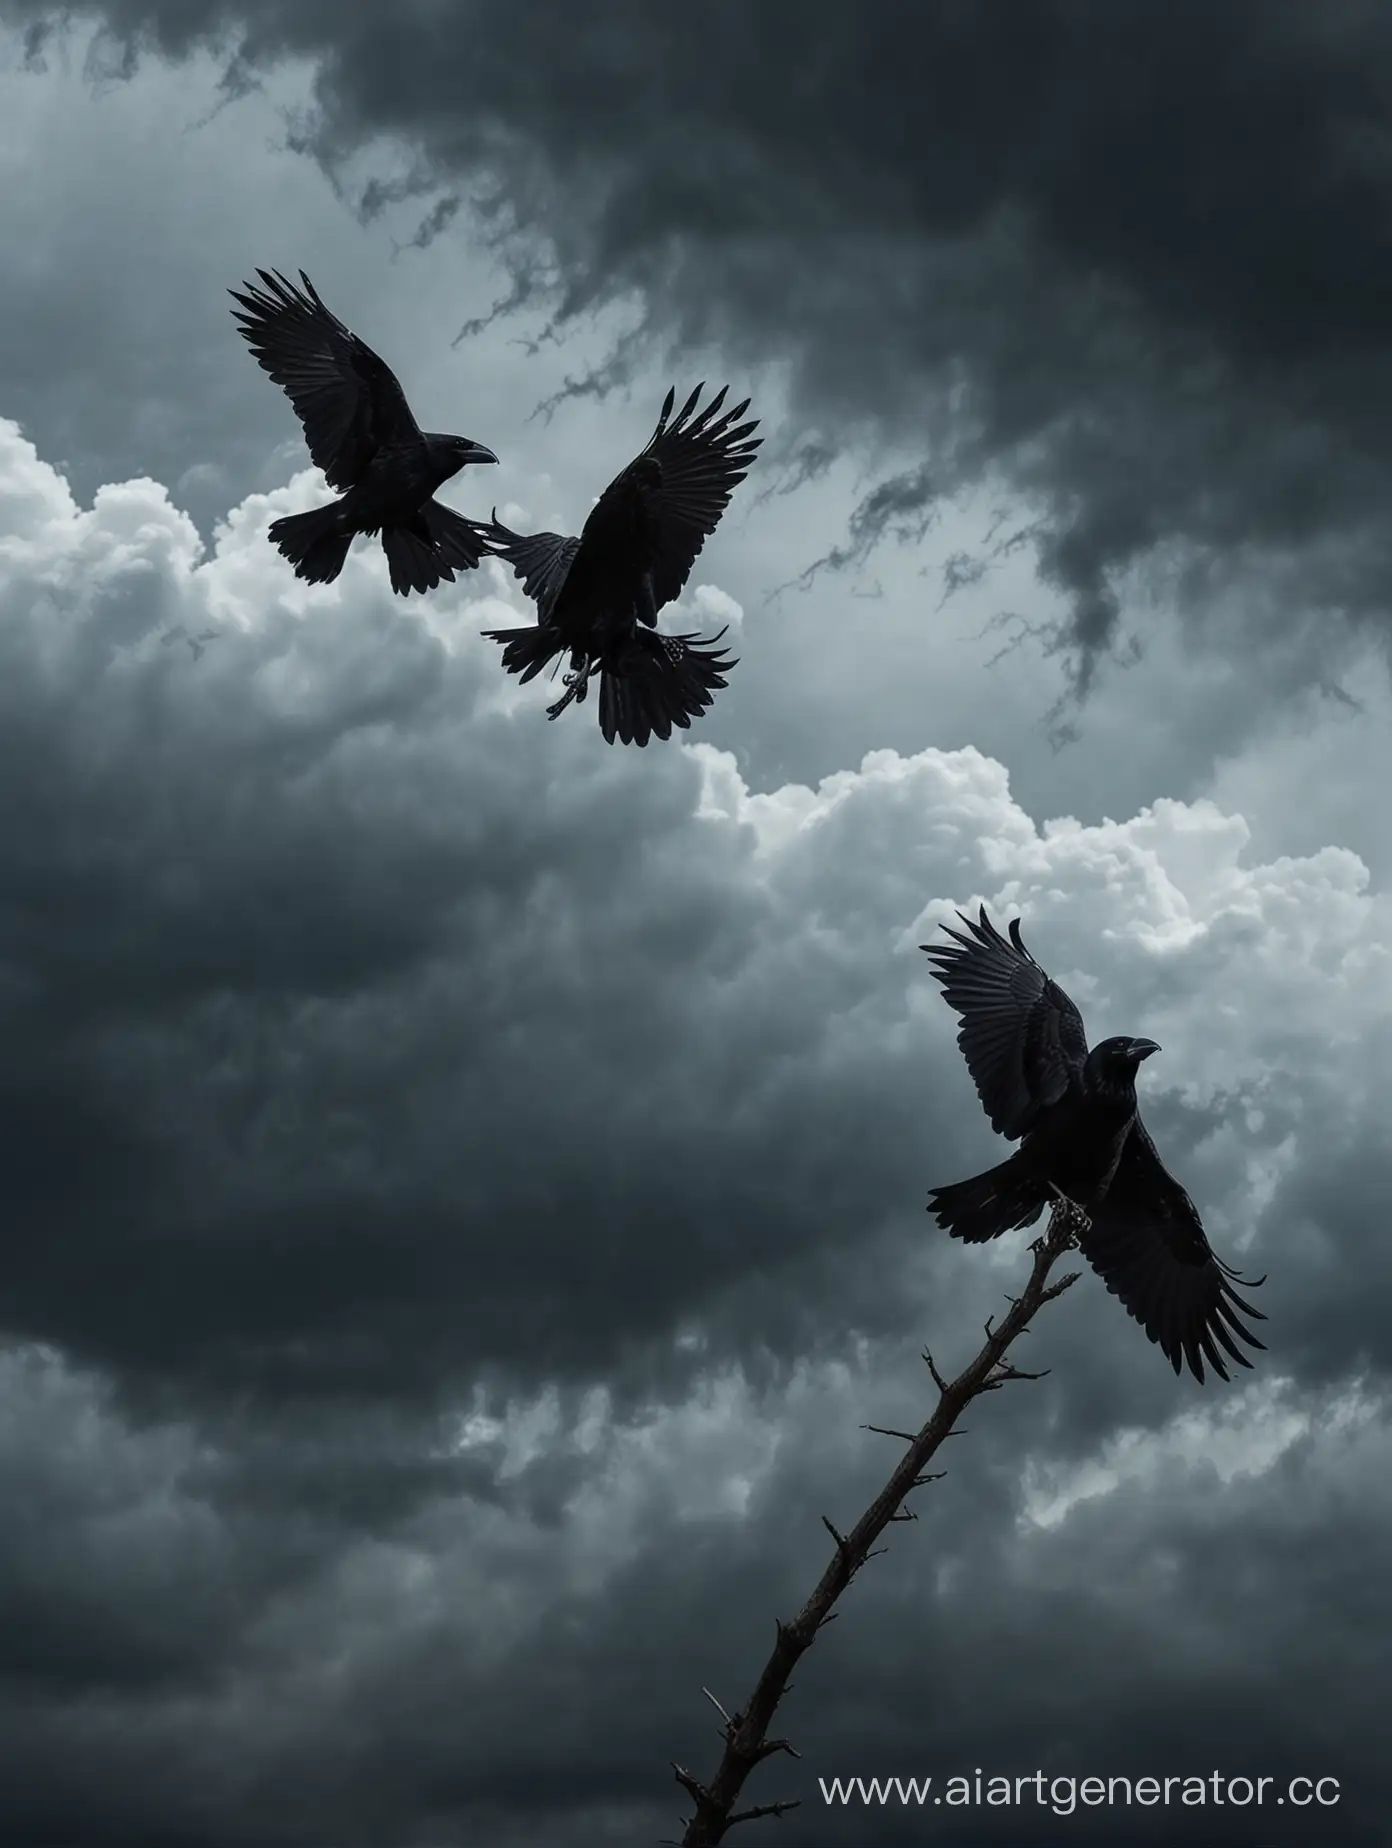 Majestic-Ravens-Soaring-Amidst-Dramatic-Cloudy-Skies